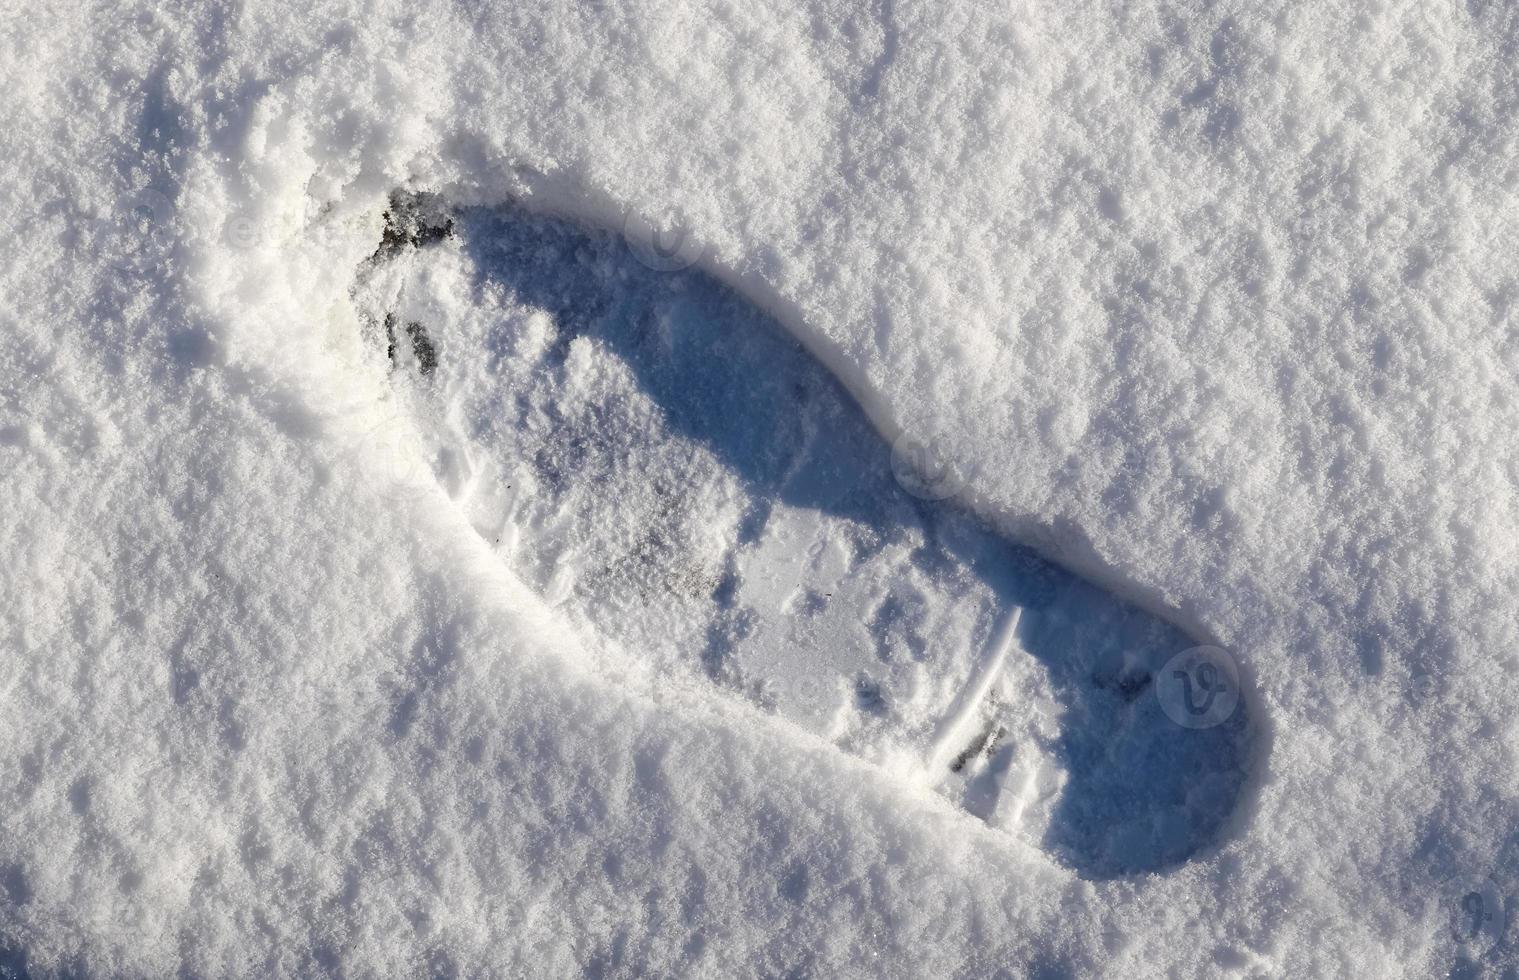 Footsteps of male shoes in fresh white snow in winter photo